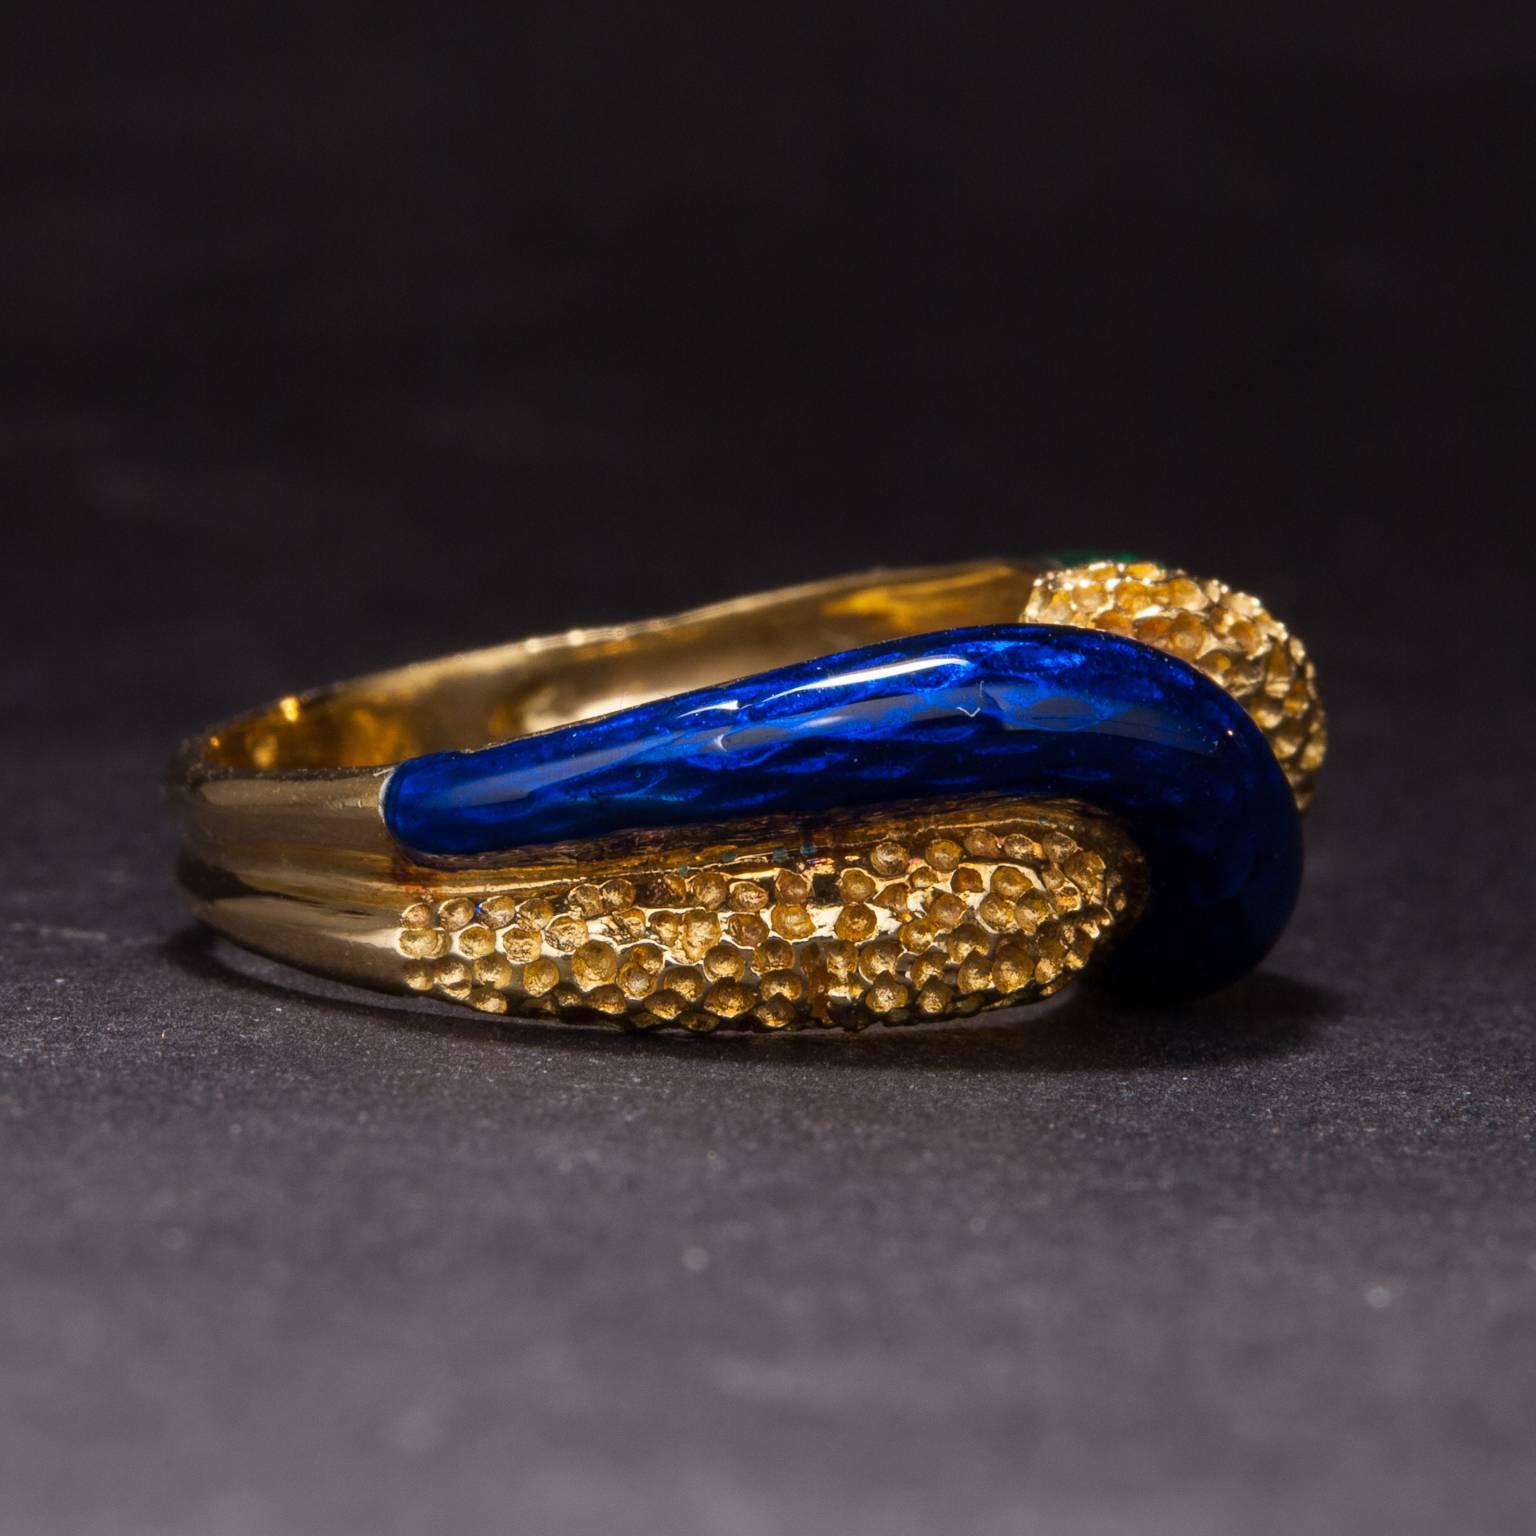 1960s Enamel and Yellow Gold Ring In Excellent Condition For Sale In Carmel, CA